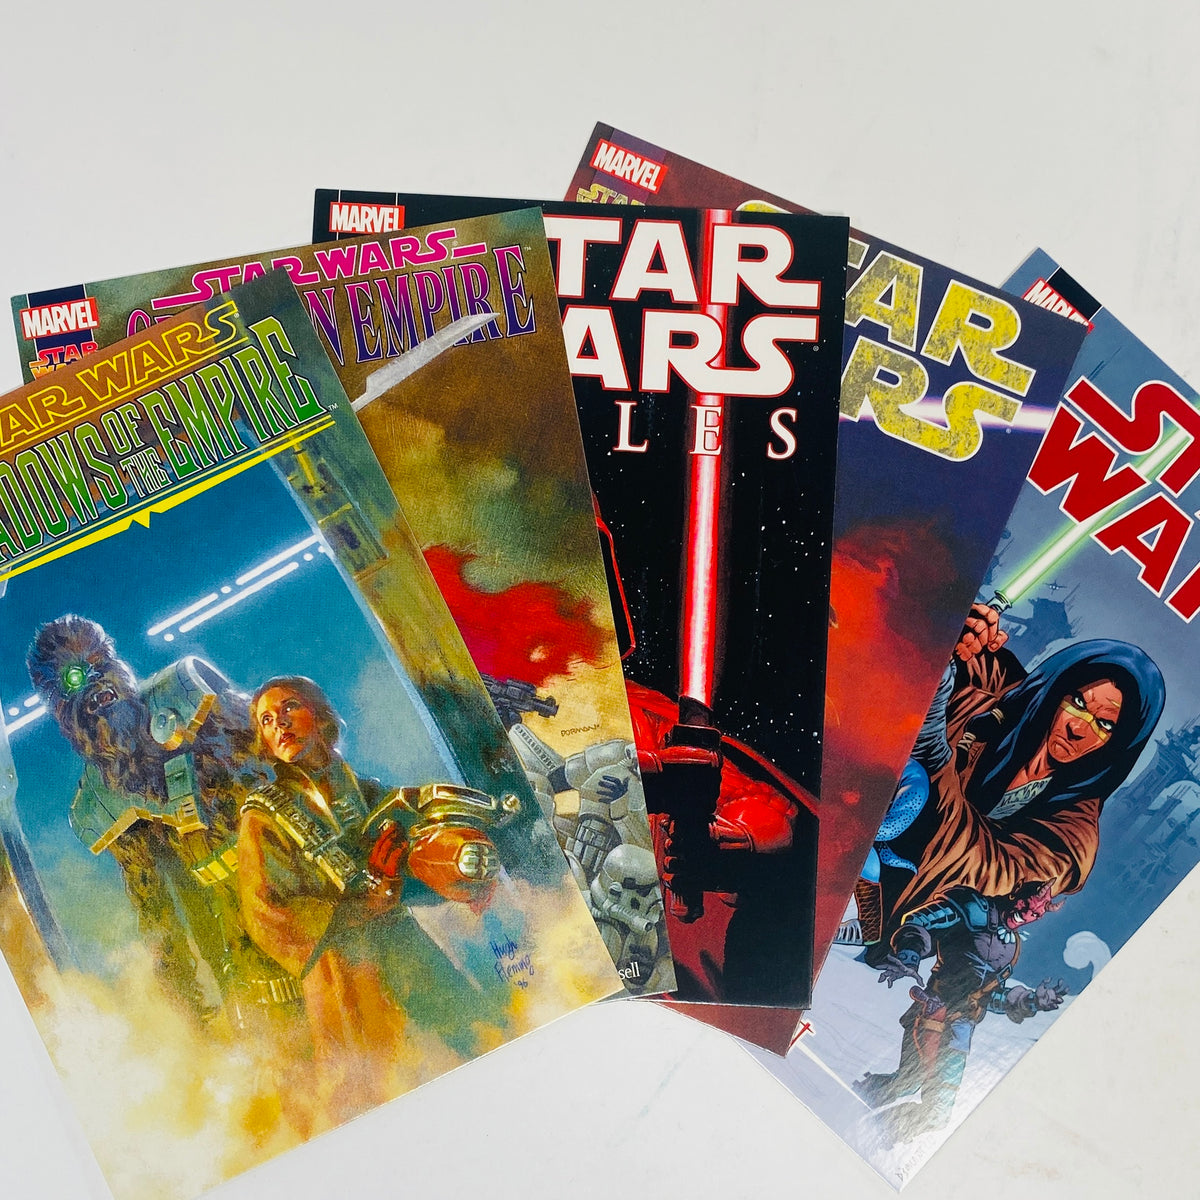 Star Wars - 100 Collectible Comic Book Cover Postcards